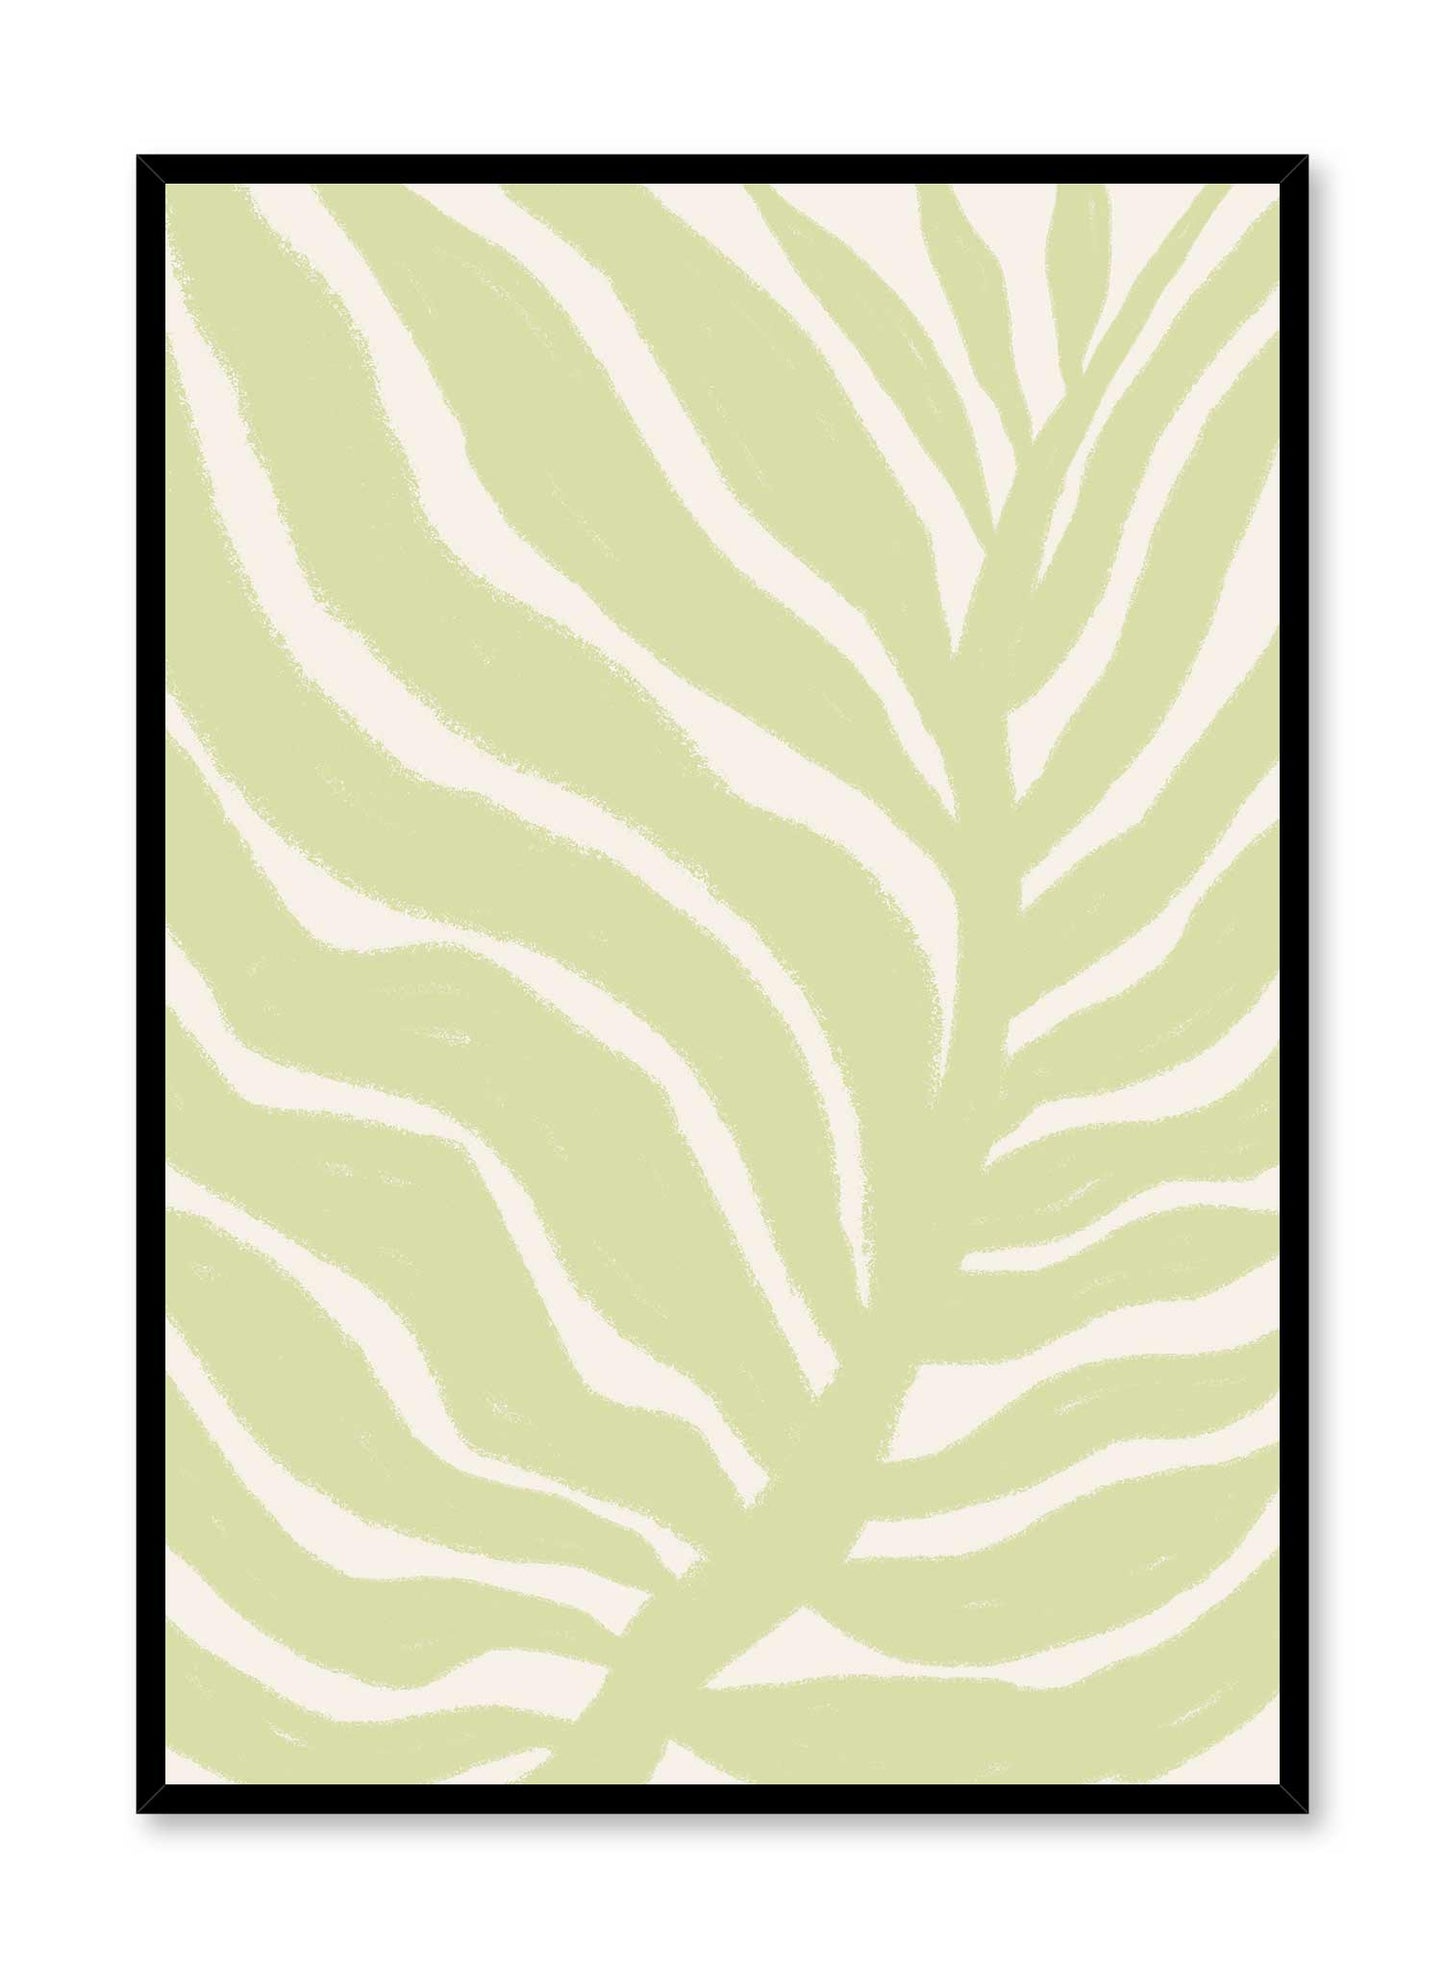 Fab Frond is a vector illustration of a close-up of a green leaf in motion by Opposite Wall.